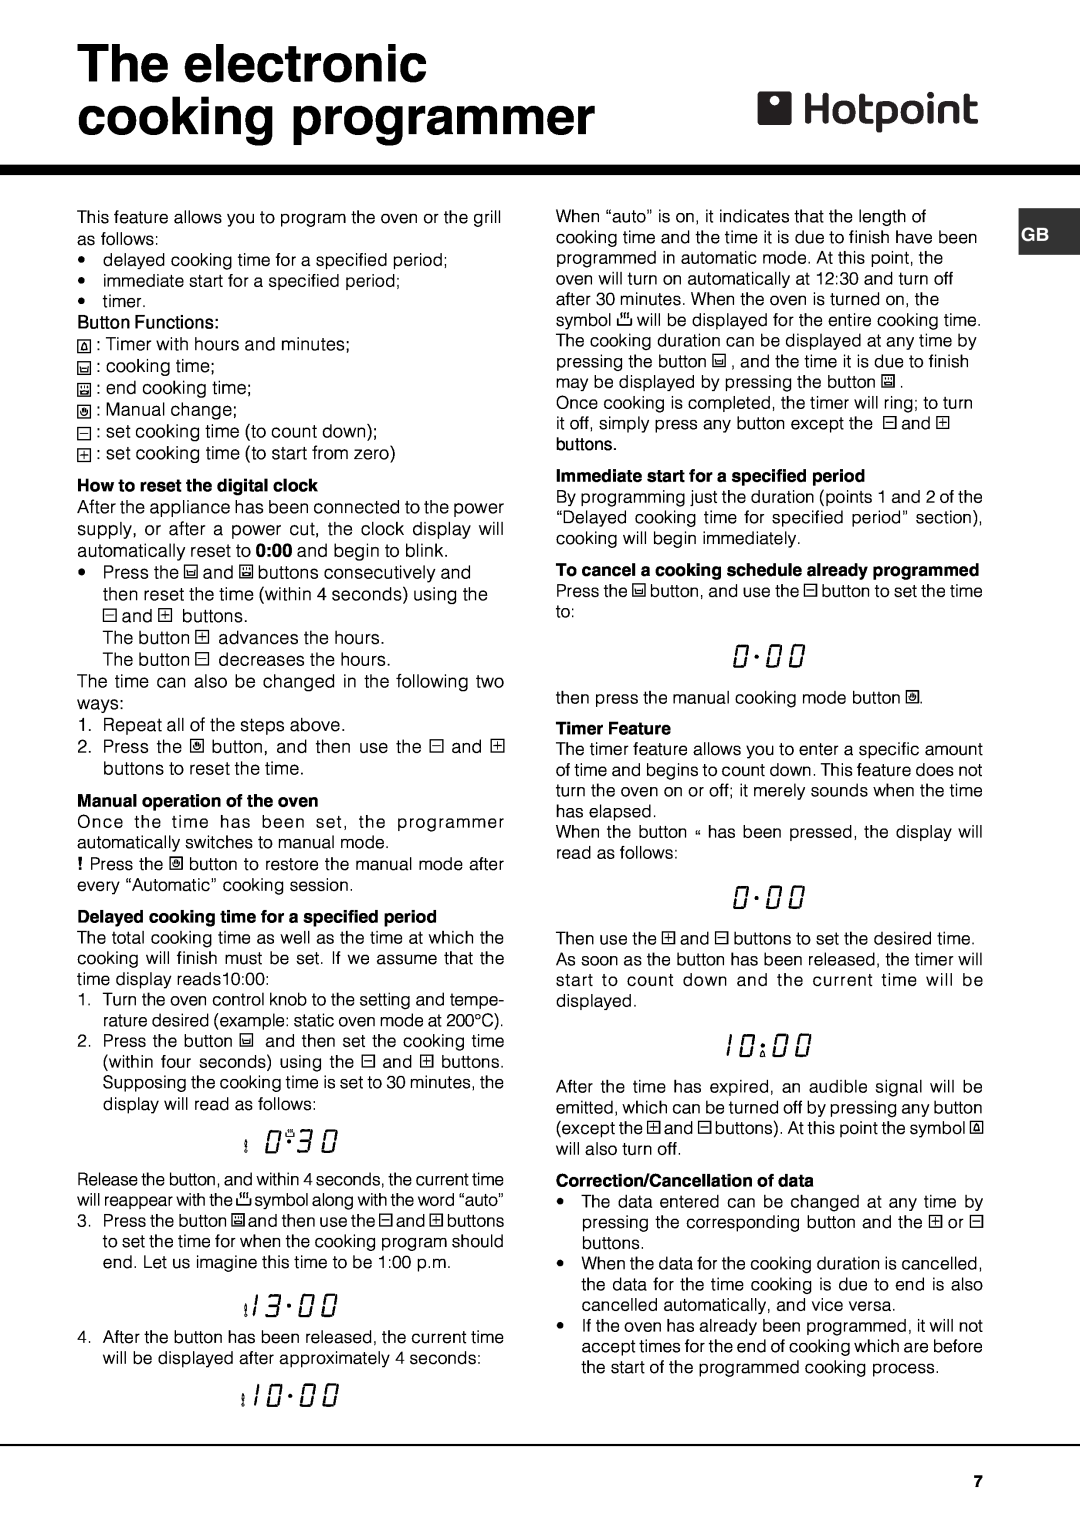 Hotpoint SE61X operating instructions The electronic cooking programmer 